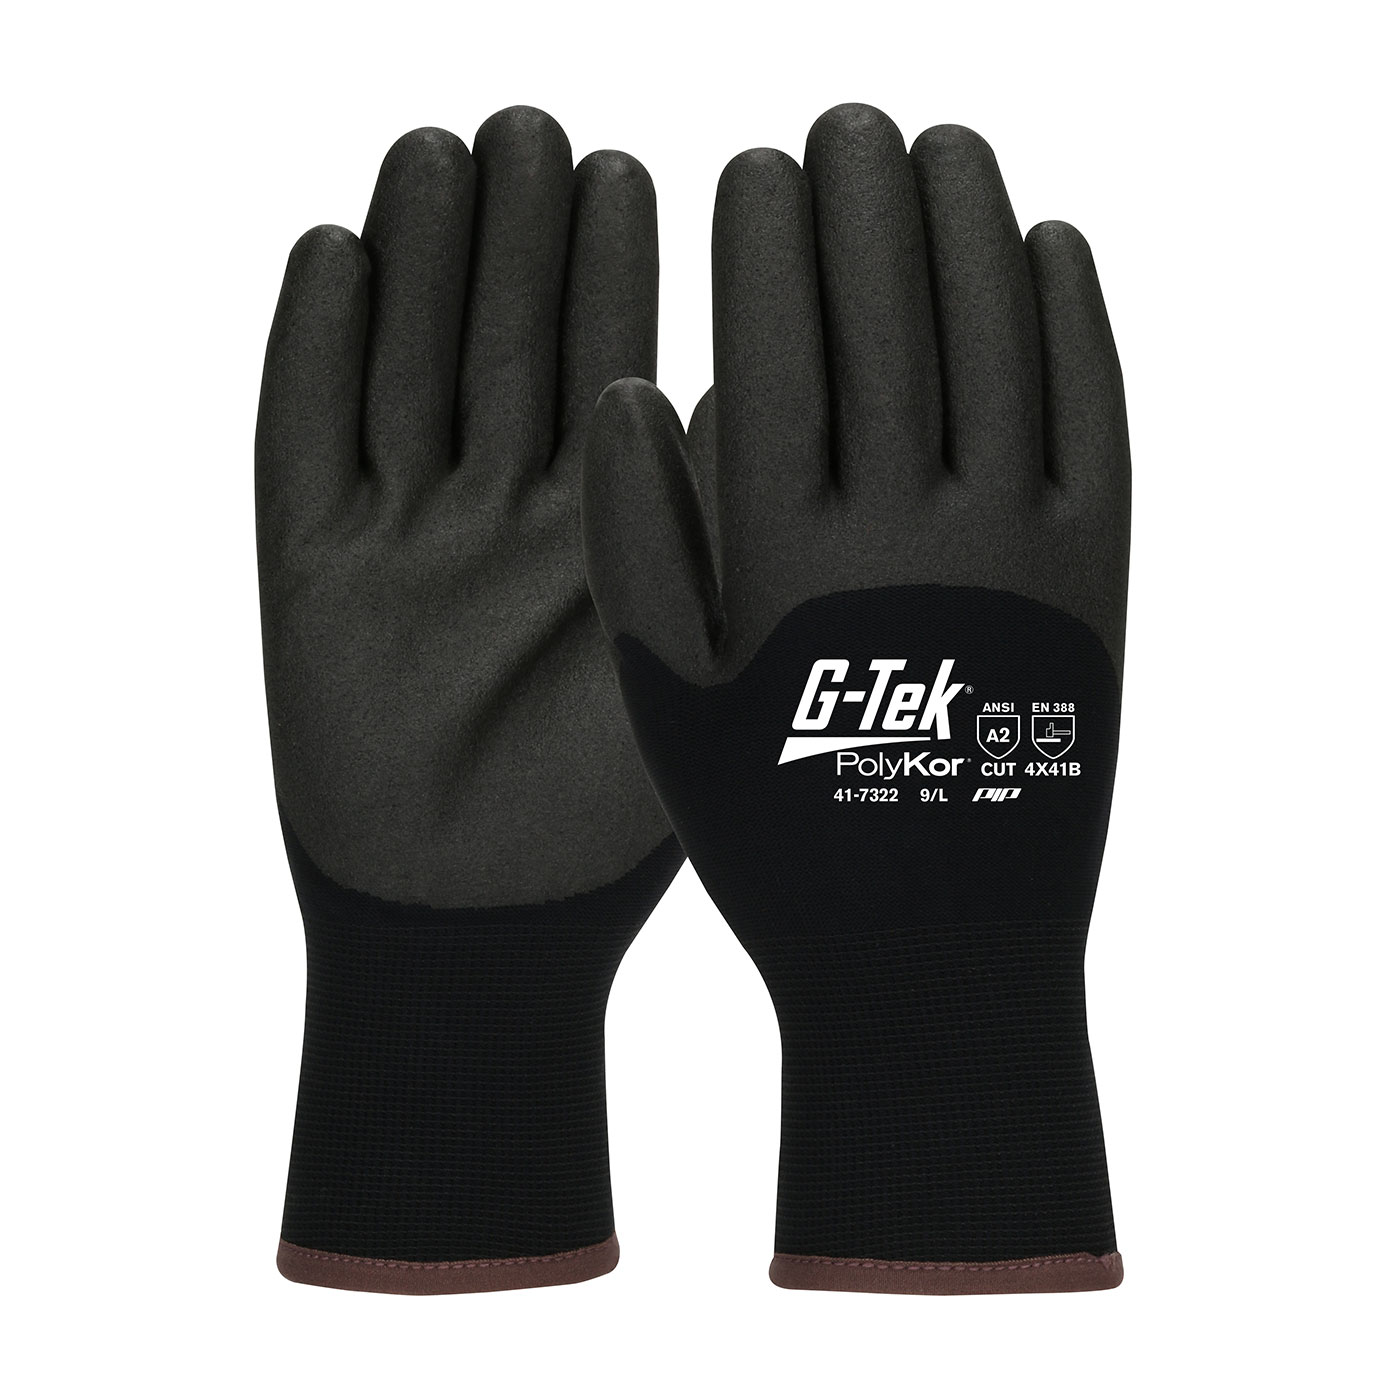 #41-7322 PIP® G-Tek® Seamless Knit PolyKor® Glove with Acrylic Liner and Double Dipped PVC Coated Foam Grip on Palm, Fingers and Knuckles